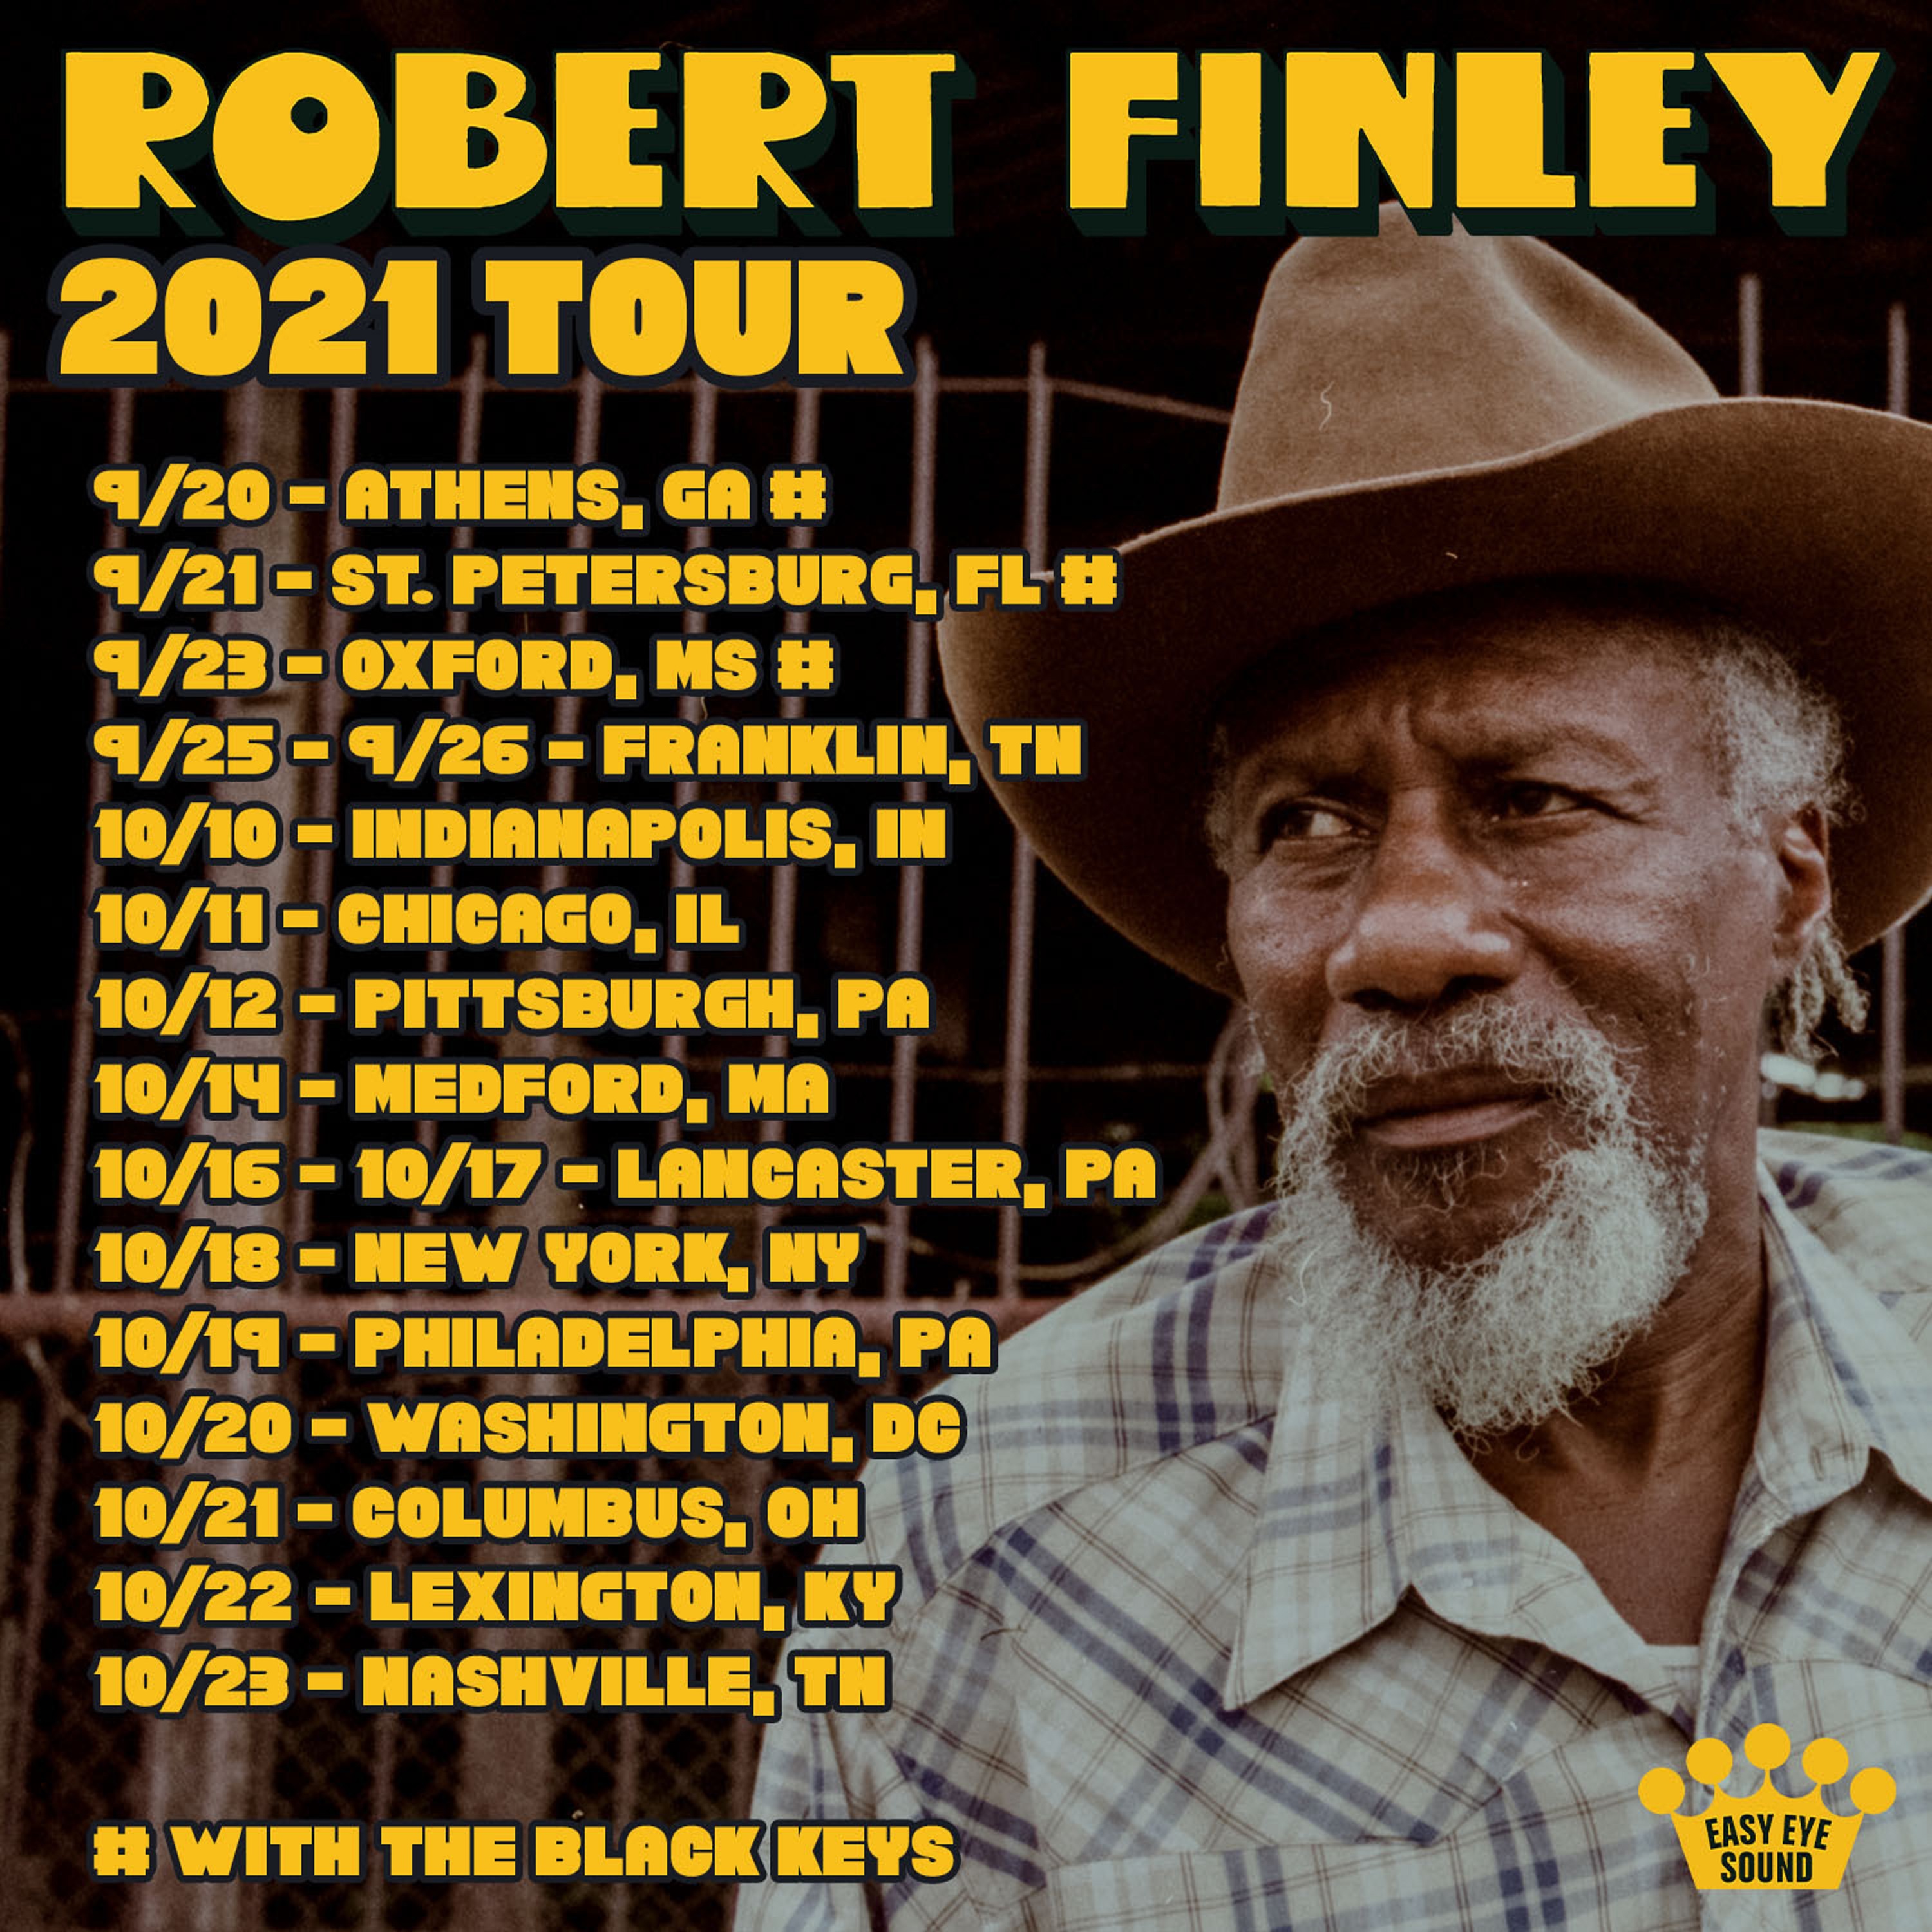 Robert Finley announces fall 2021 tour and premieres "I Can Feel Your Pain"